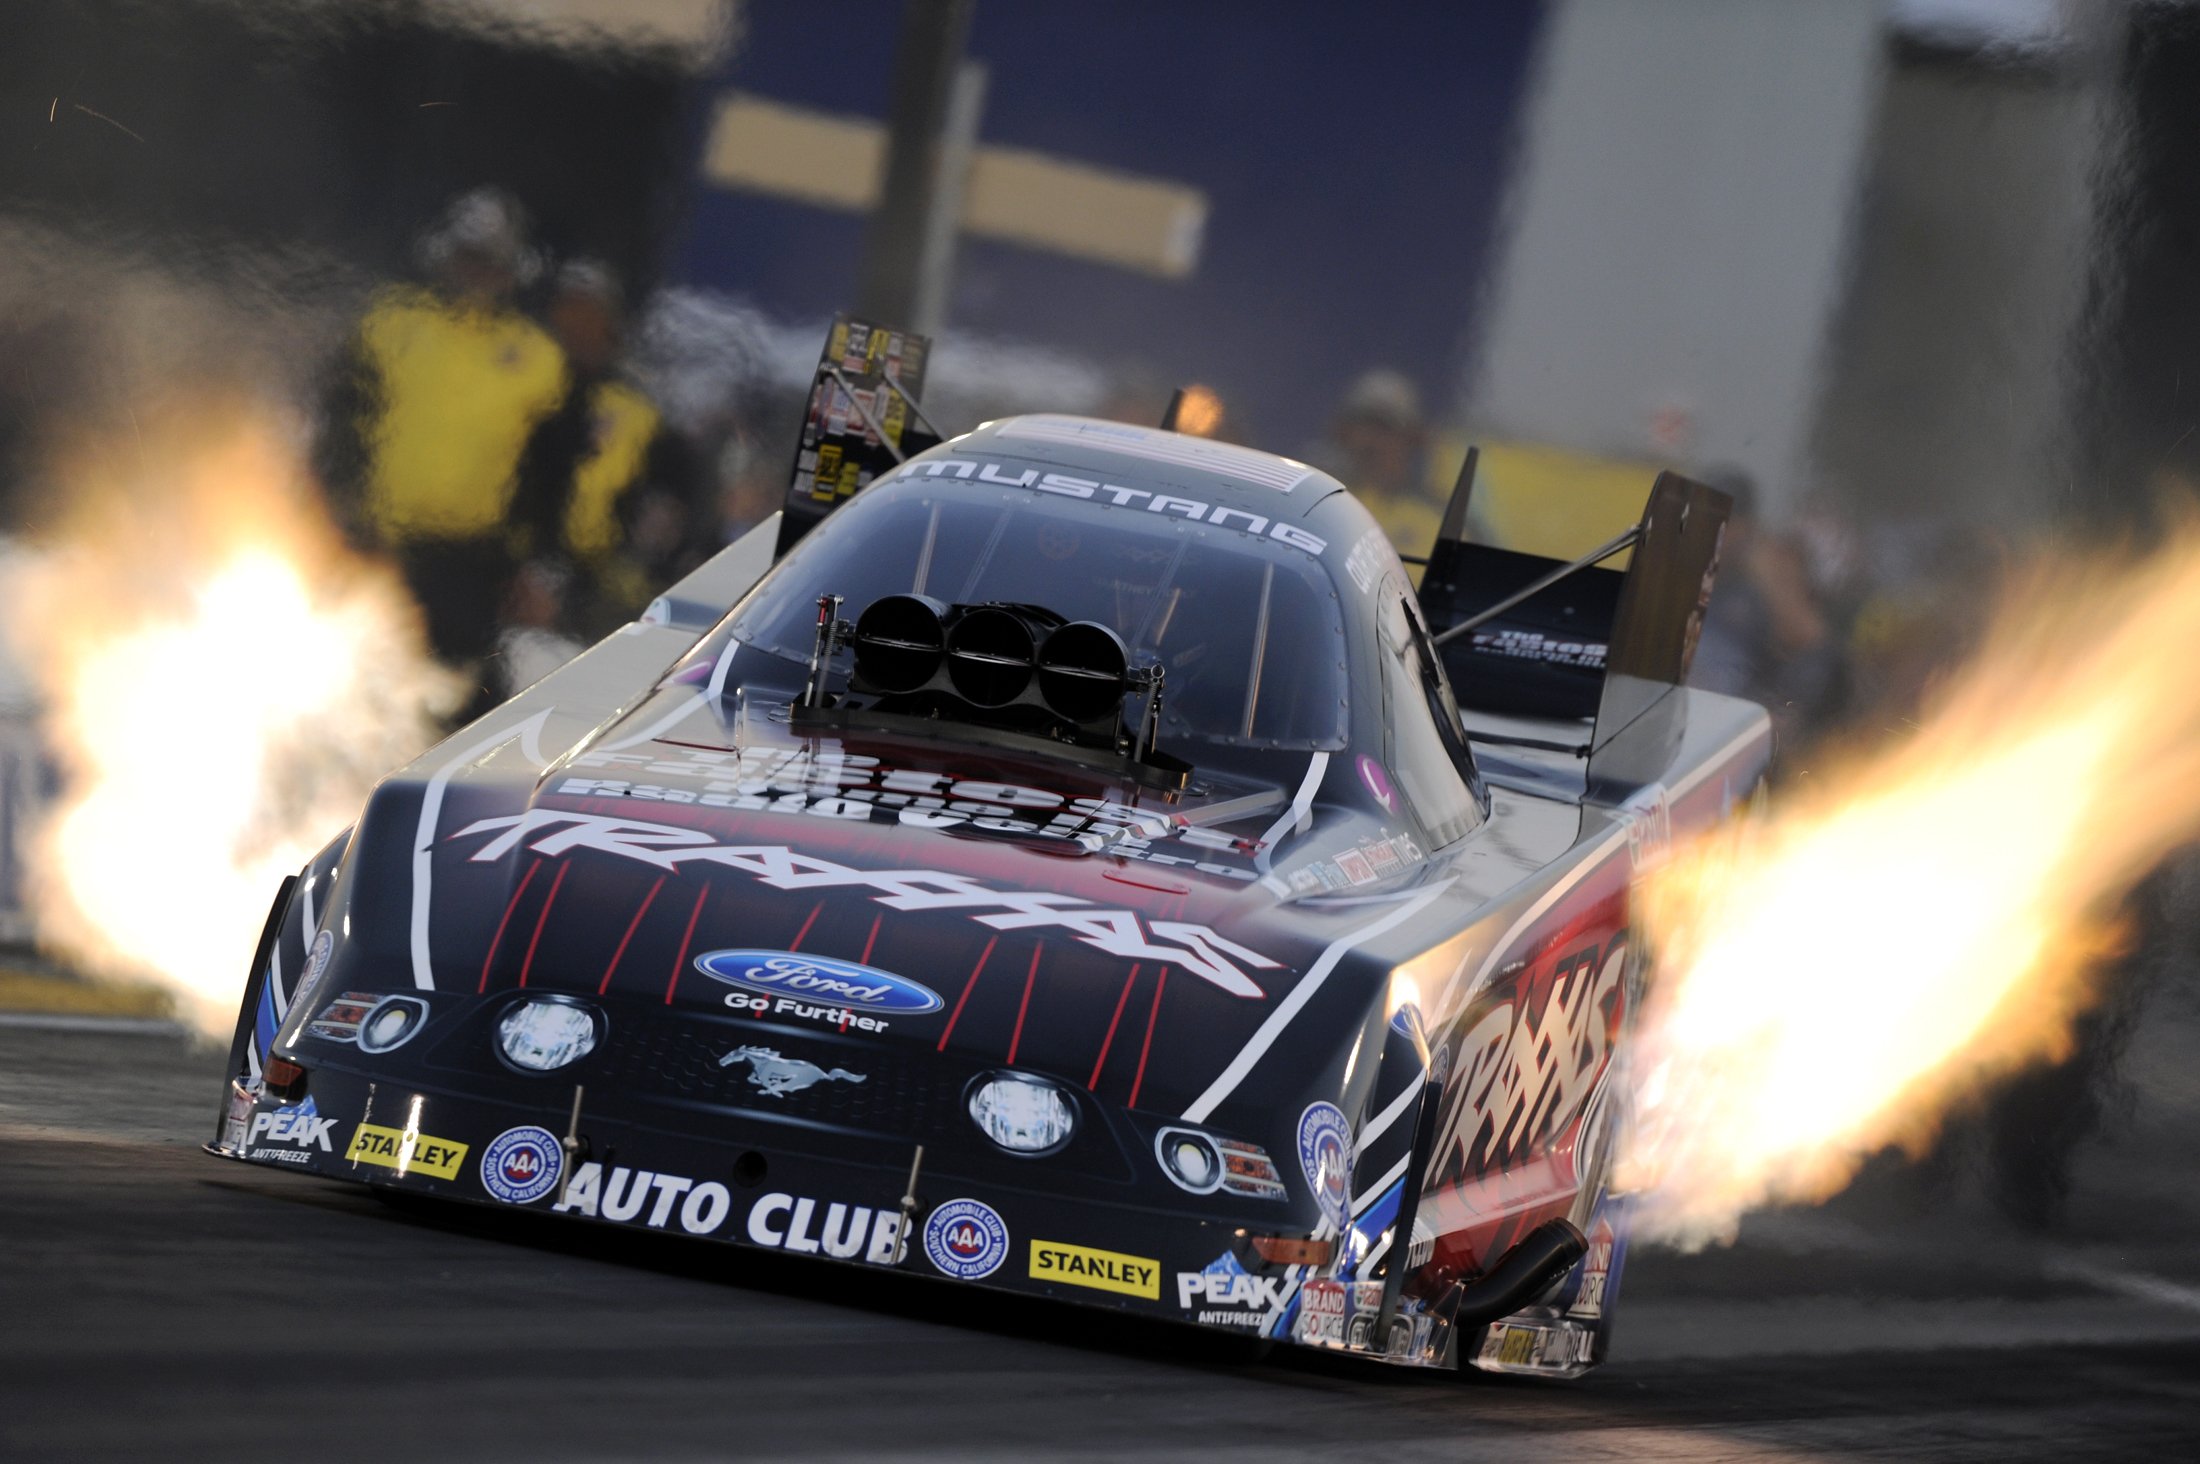 drag, Racing, Hot, Rod, Rods, Race, Muscle, Nhra, Funnycar, Funny Wallpaper